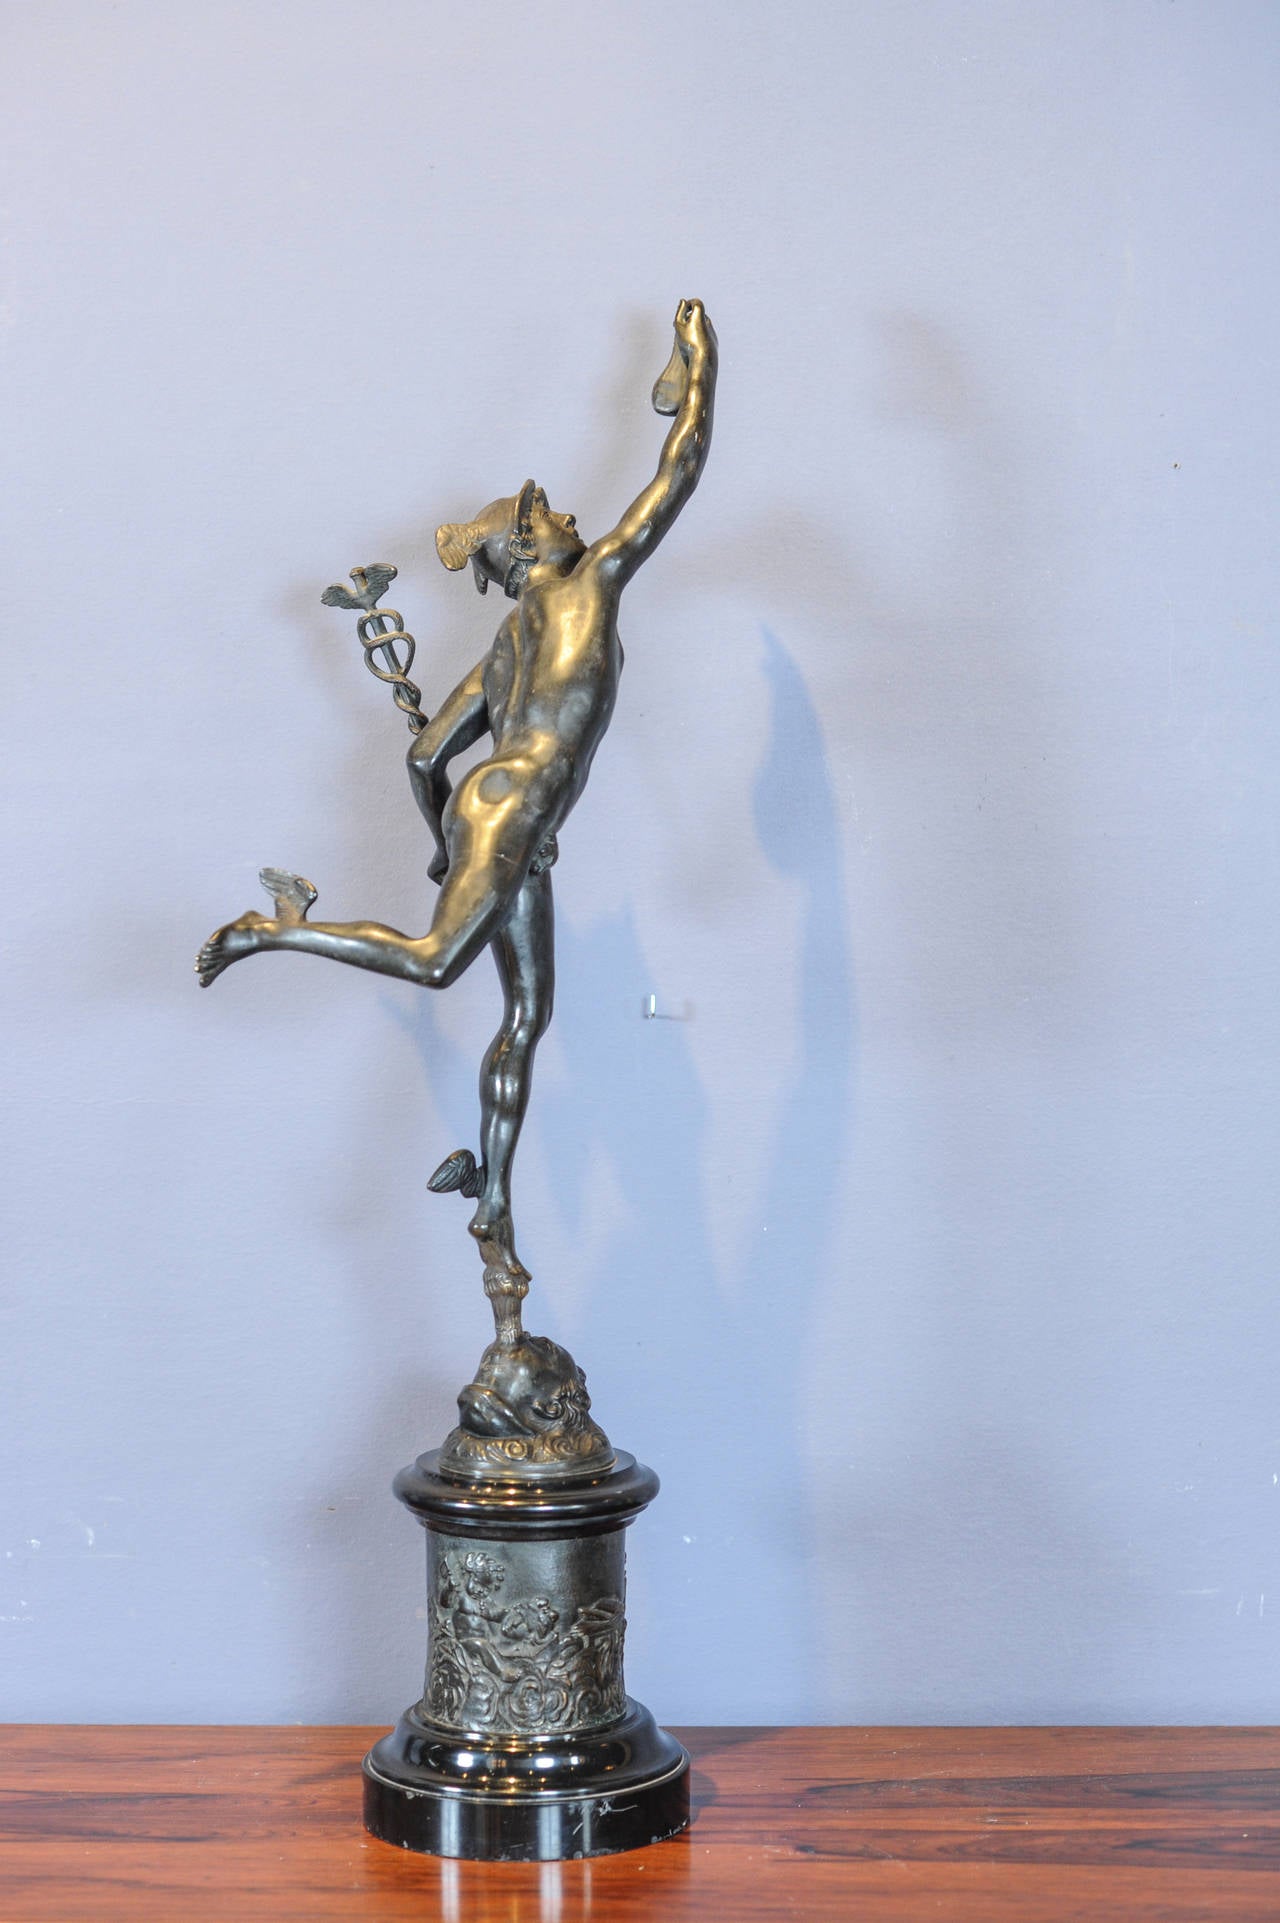 A large late 19th Century patinated bronze sculpture of Hermes / Mercury after the famous design by Giambologna (Jean (de) Boulogne) from ca. 1580, signed 'J Bologne' on the cherub (personification of the wind).